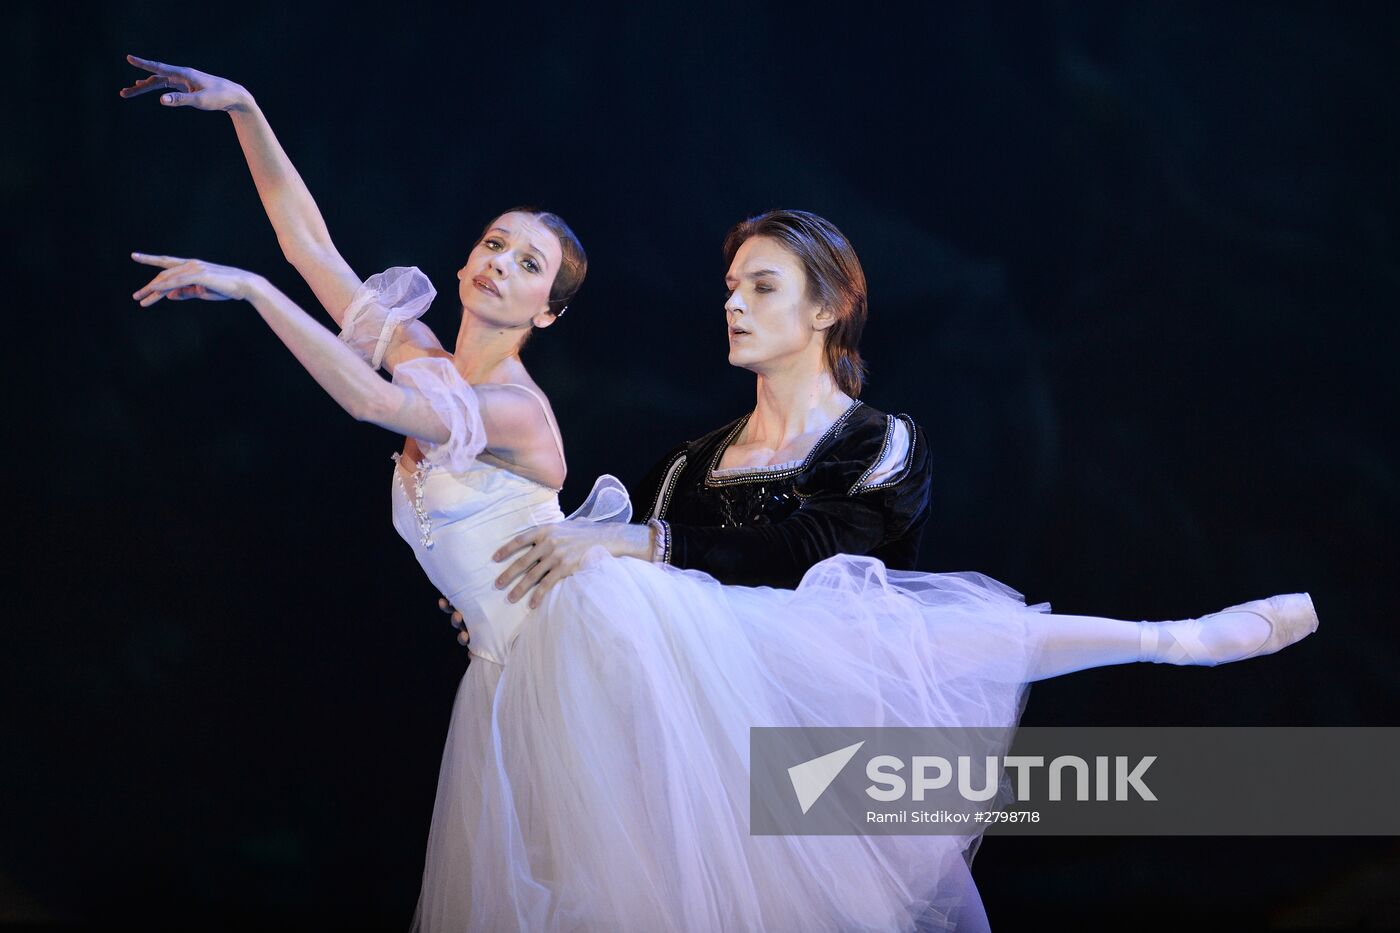 Gala concert of classic and modern choreography "Road to Star"